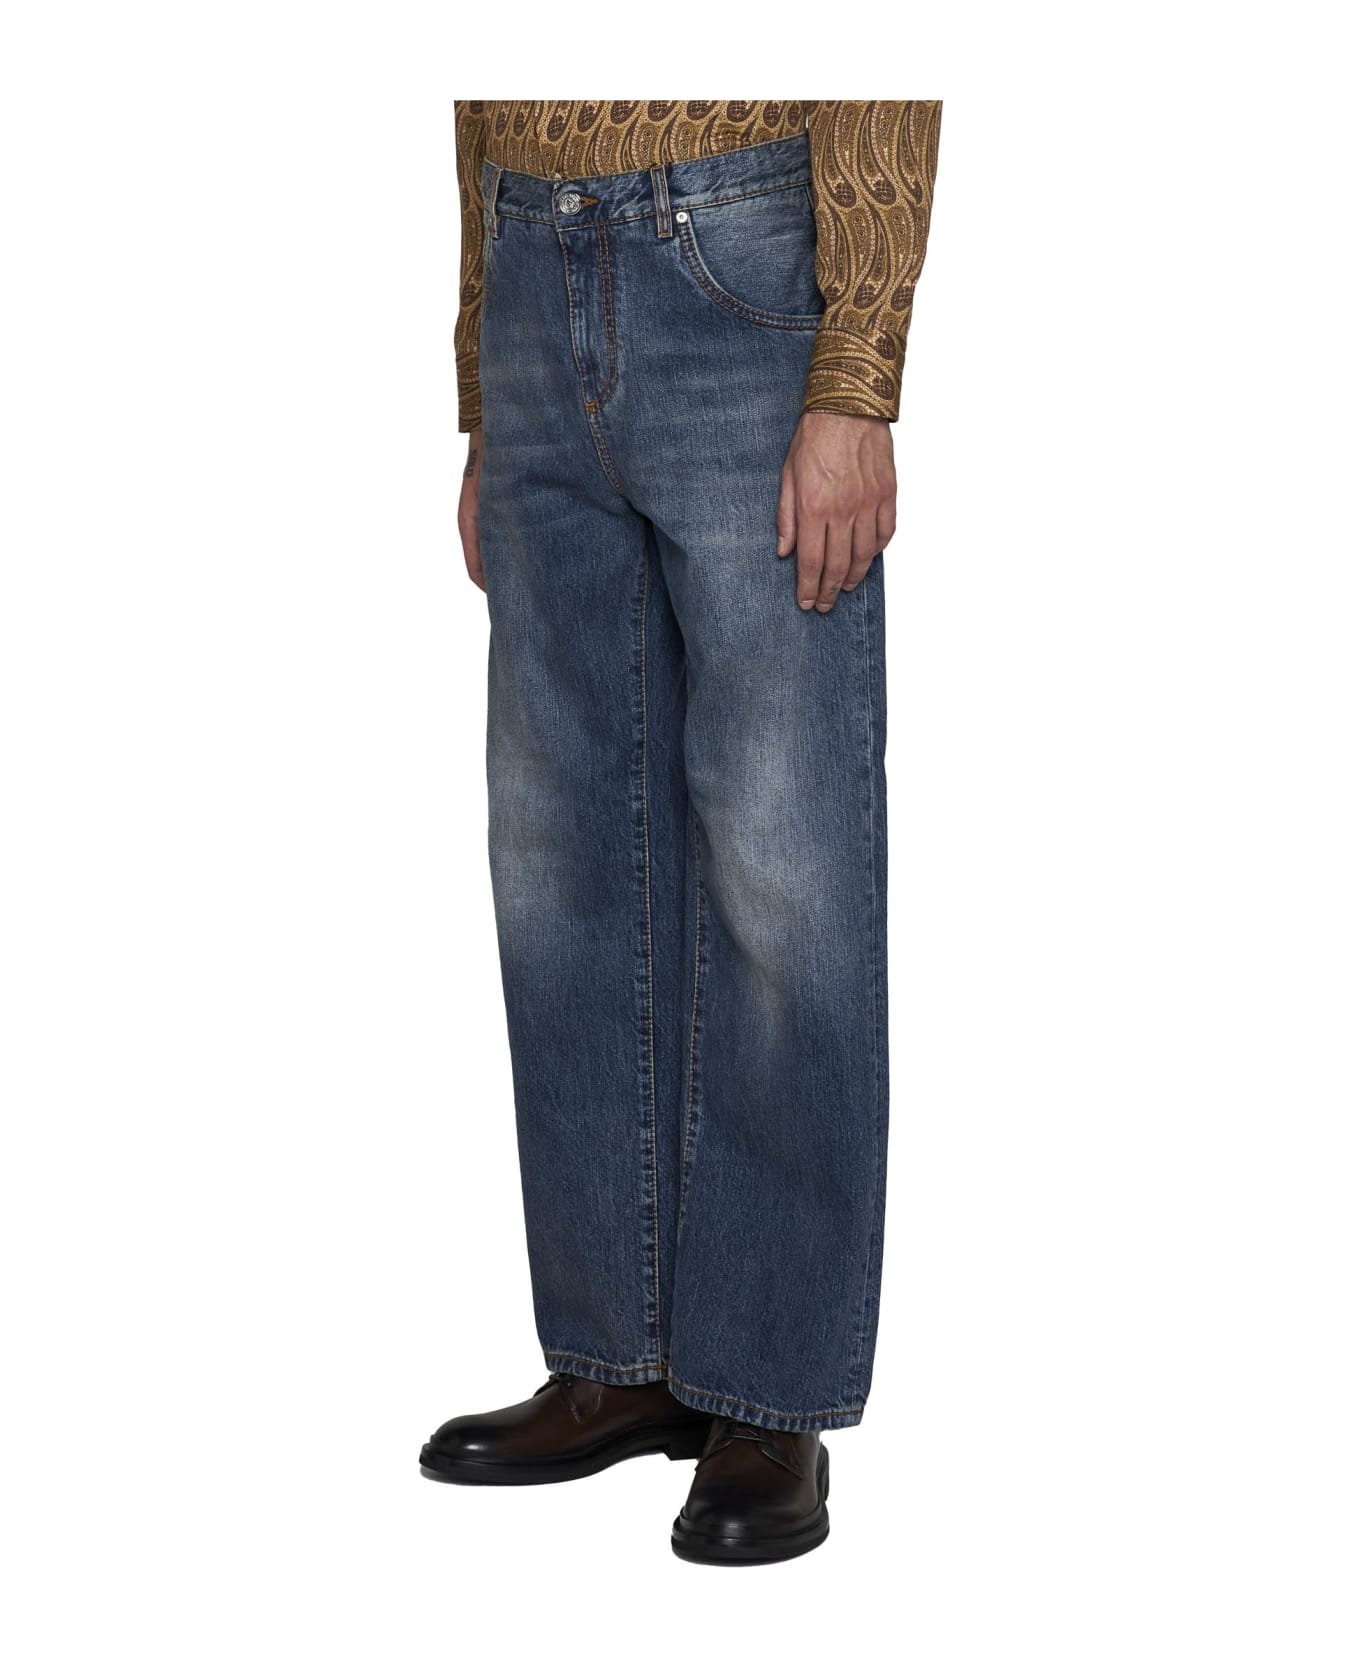 Etro Easy Fit Jeans - Blu